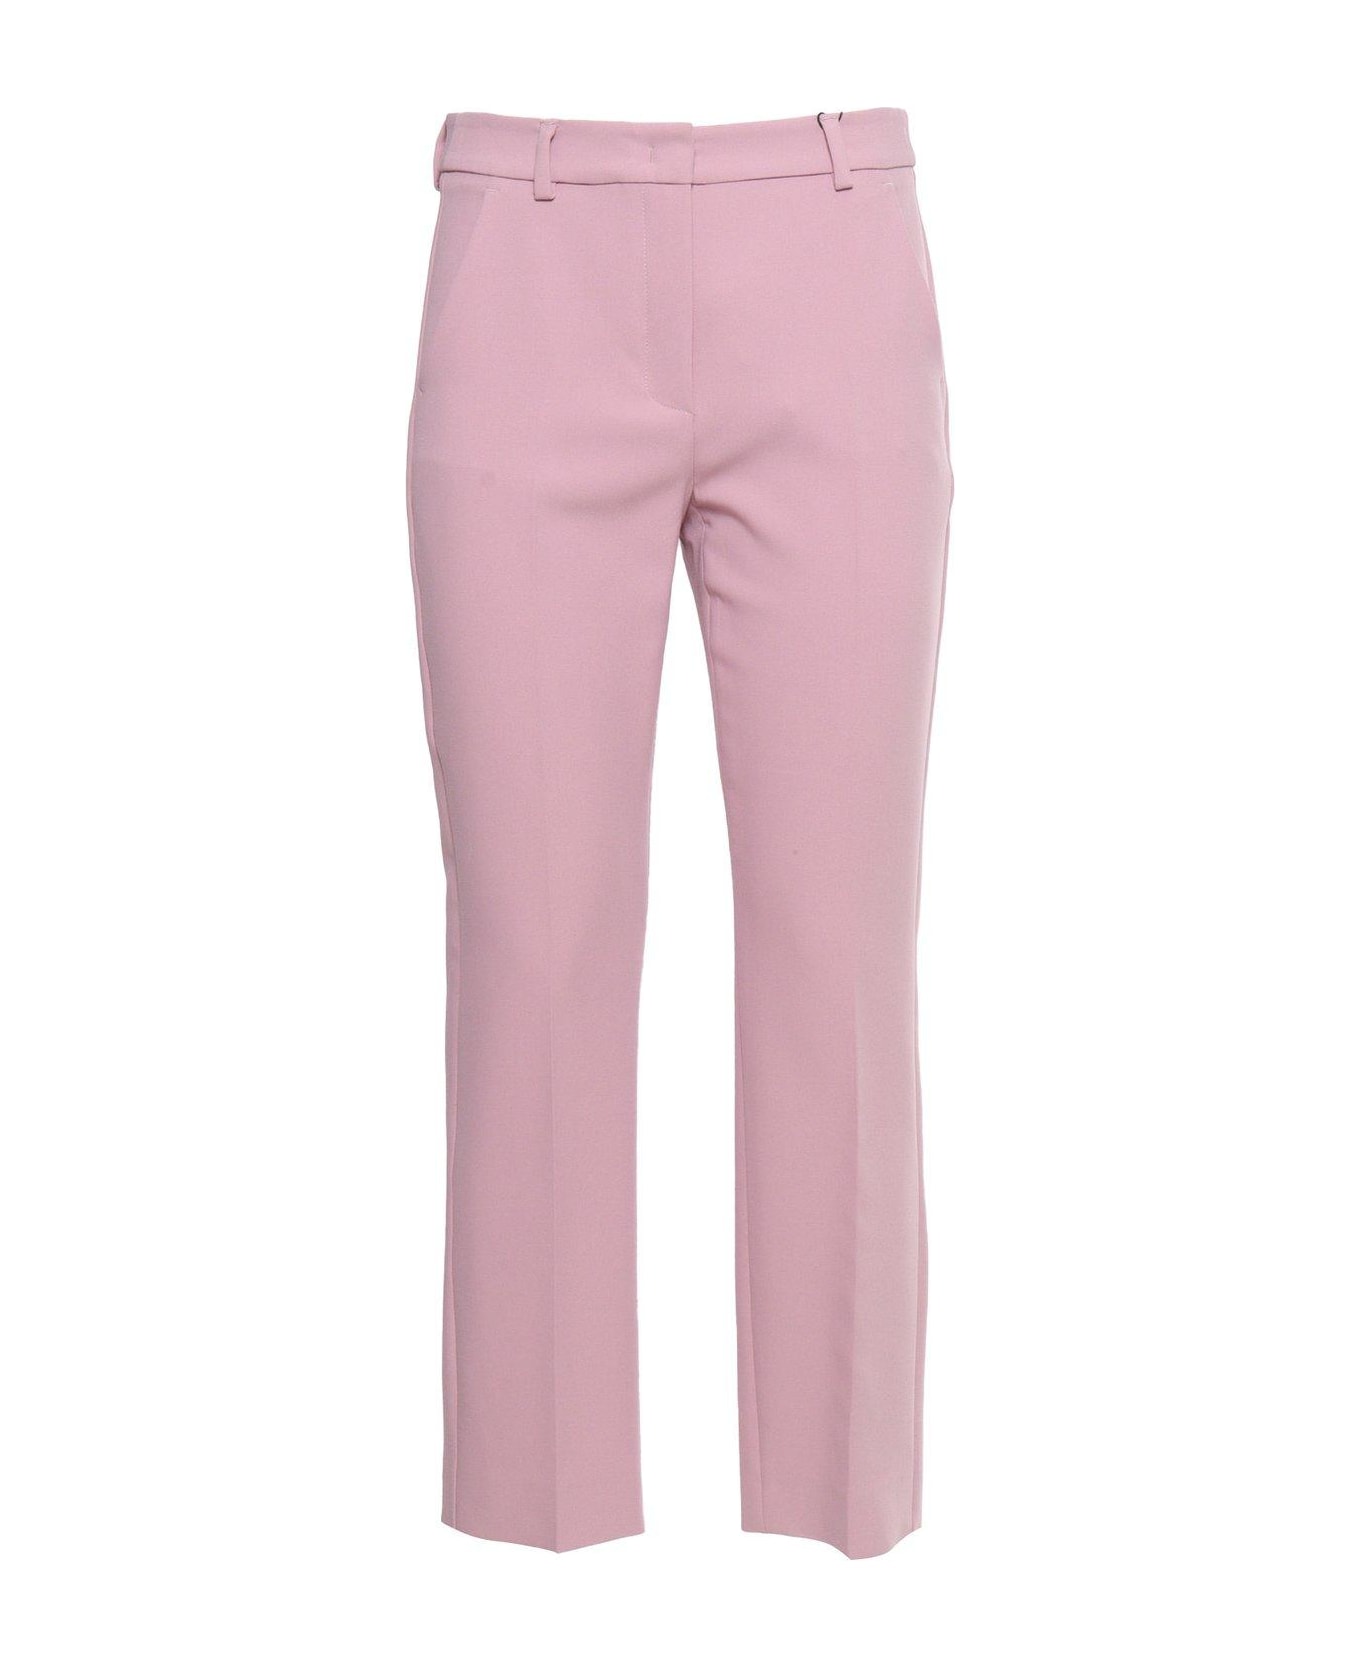 Weekend Max Mara Straight Fit Cropped Trousers - PINK ボトムス